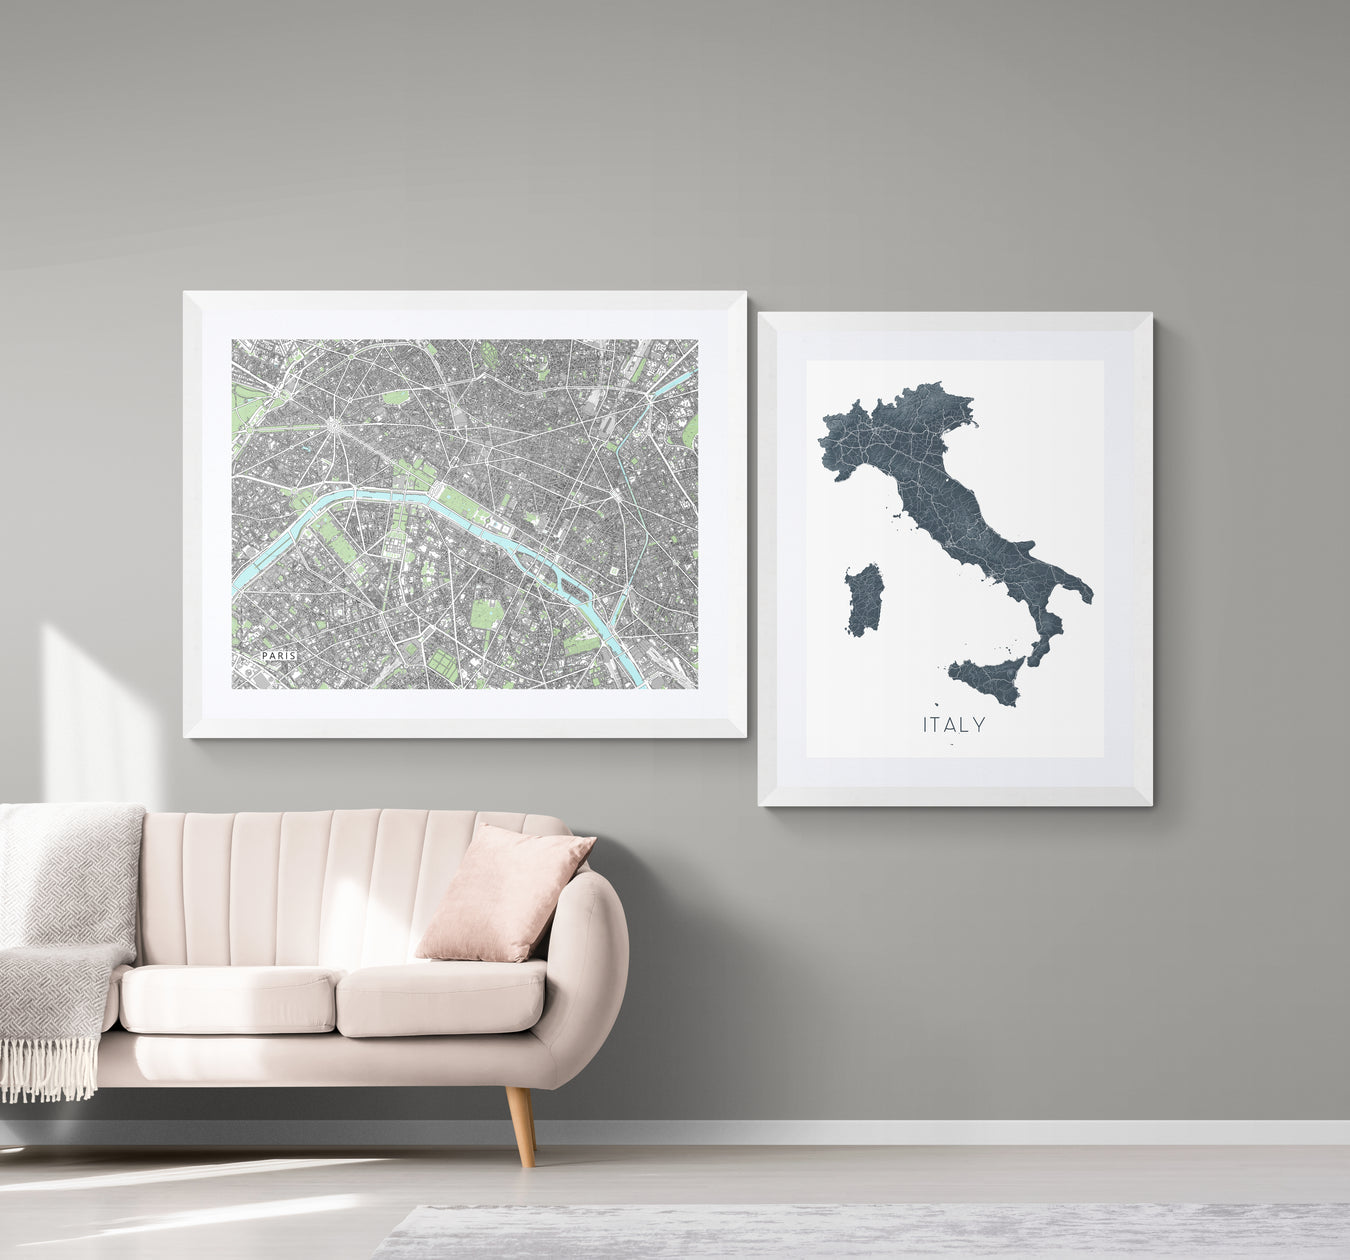 Europe map prints and posters by Maps As Art.